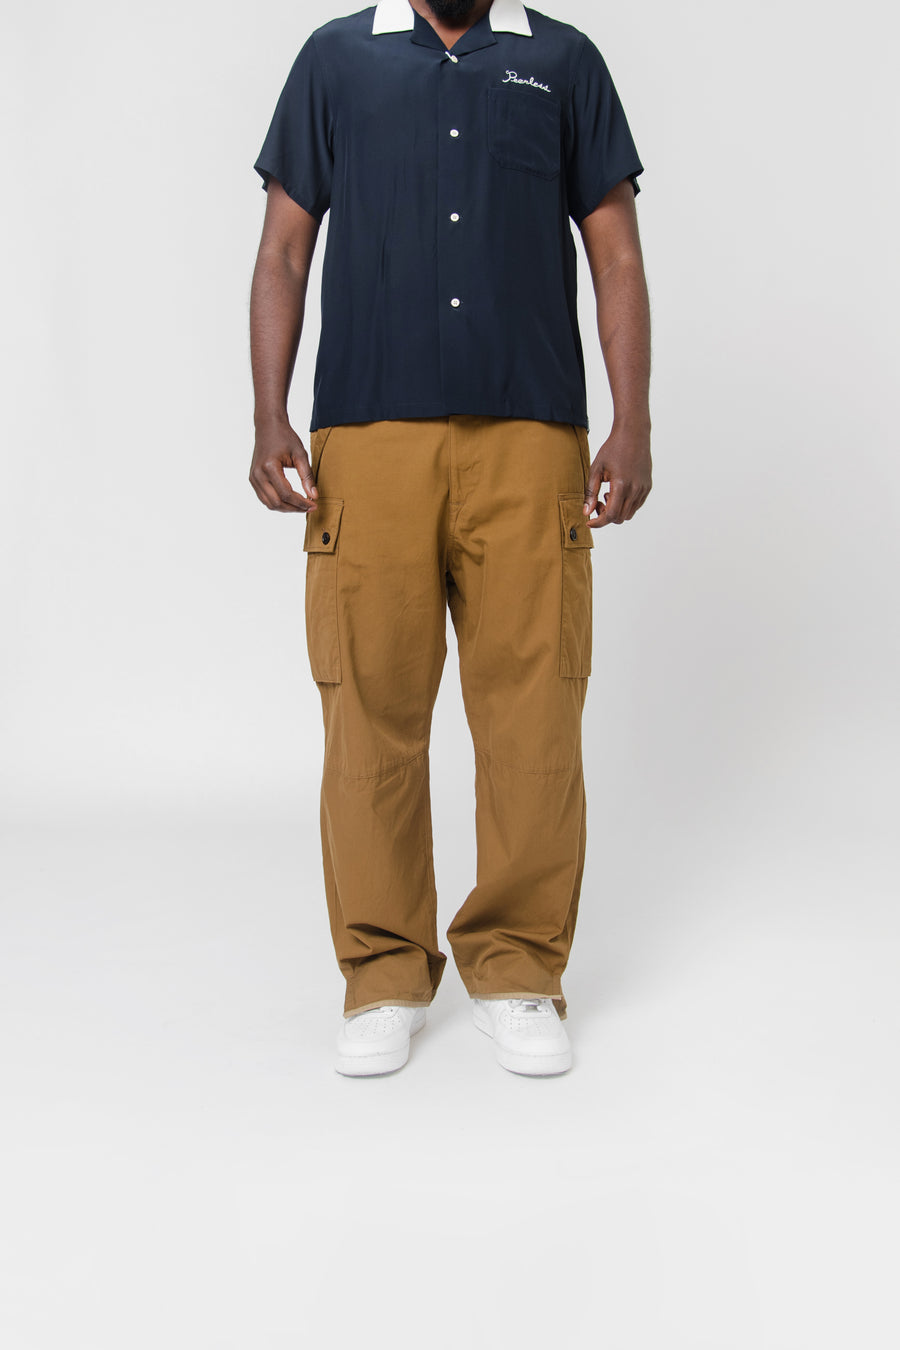 Ferngully Pant Light Brown